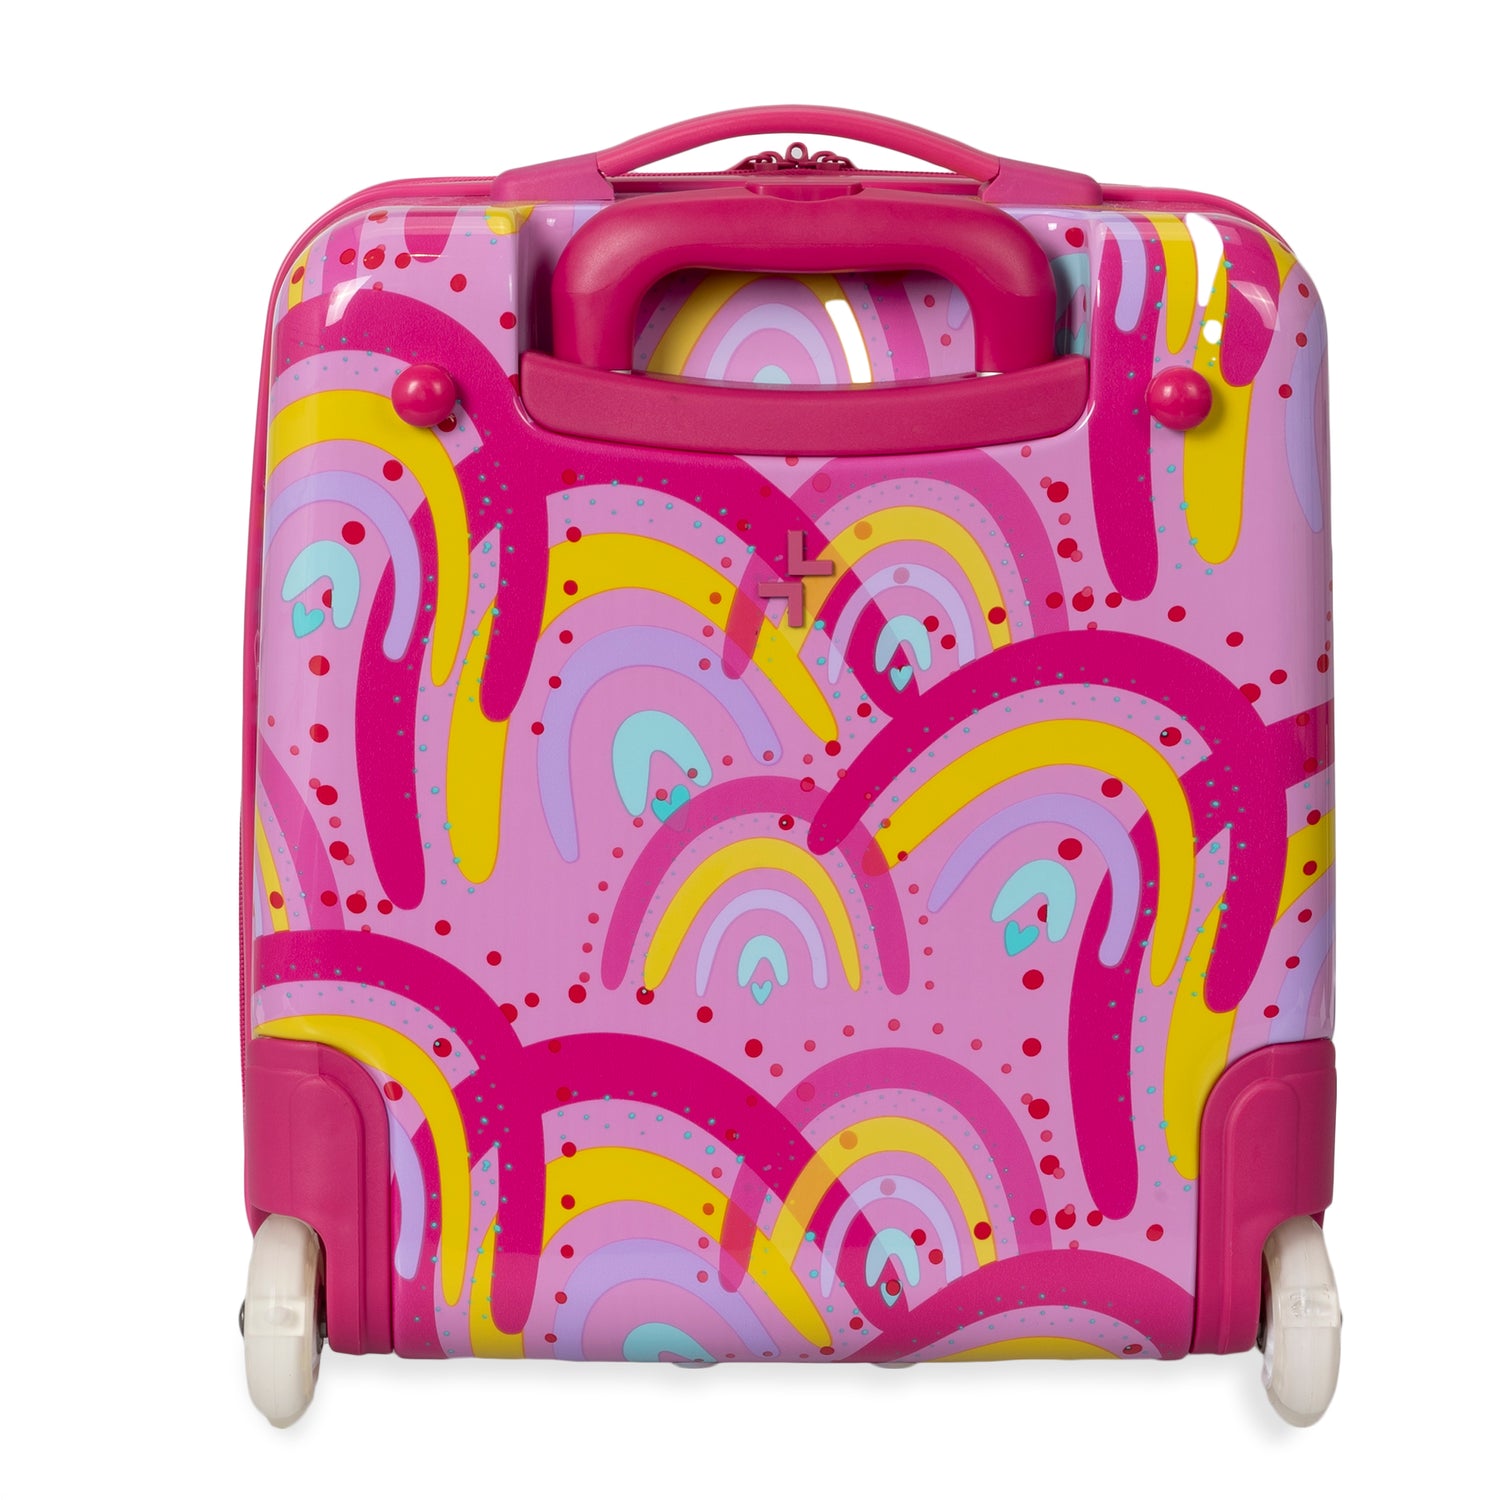 Backside of a pink and yellow, rainbow-print kids luggage designed by Triforce on a white background.